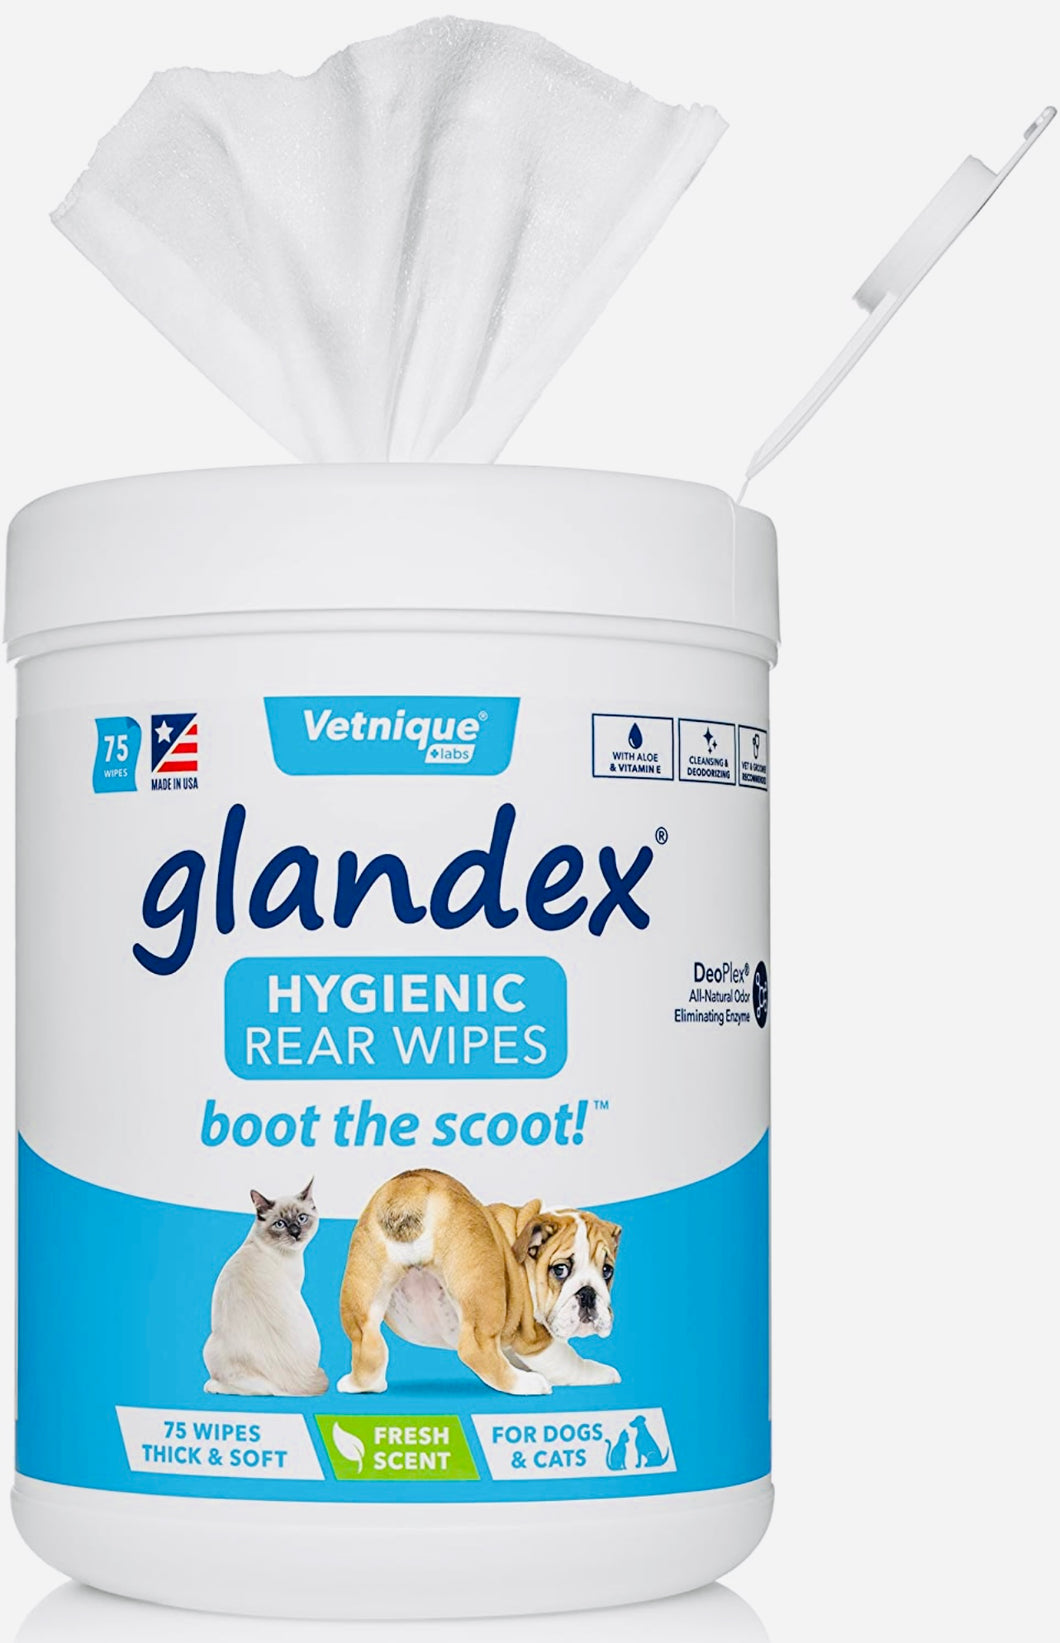 Glandex Dog Cat & Pet wipes cleansing and Deodorising Hygienic wipes 75 CT fresh scent